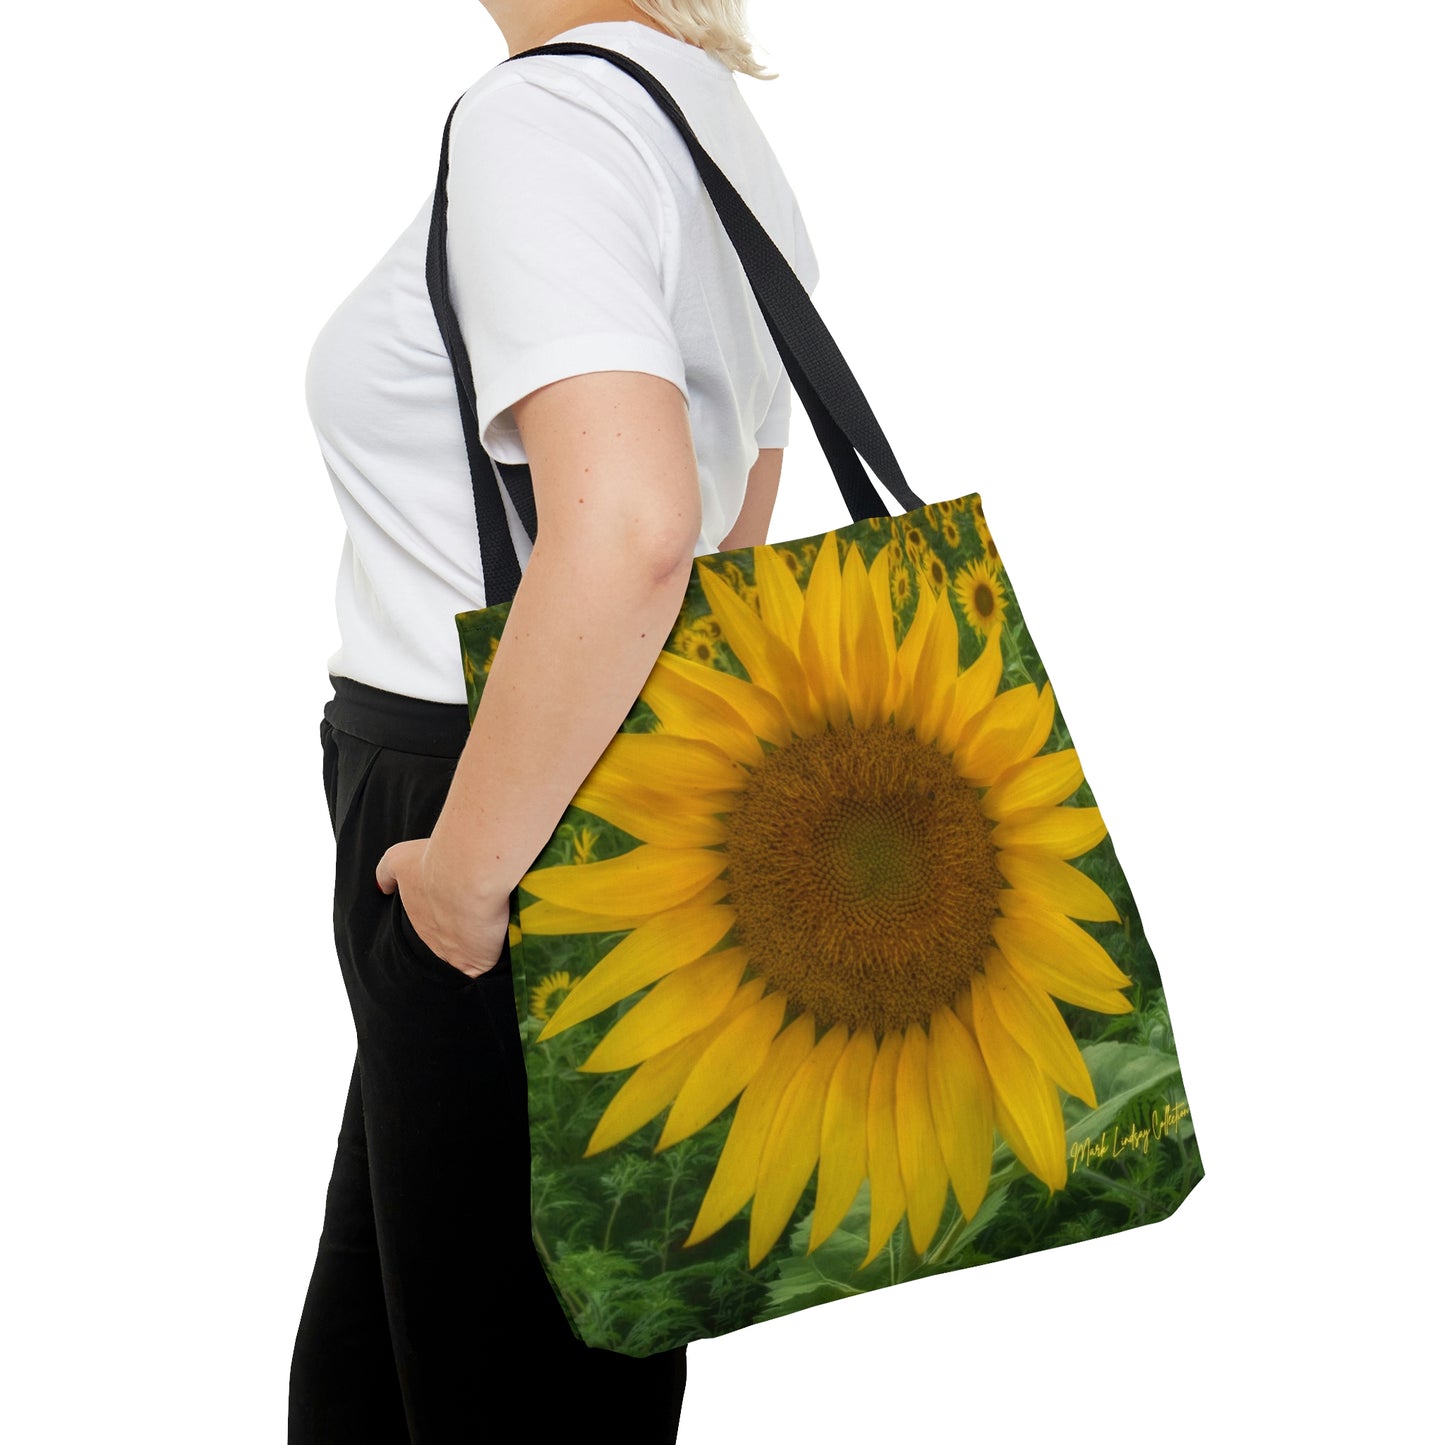 The Lead Sunflower Art Tote